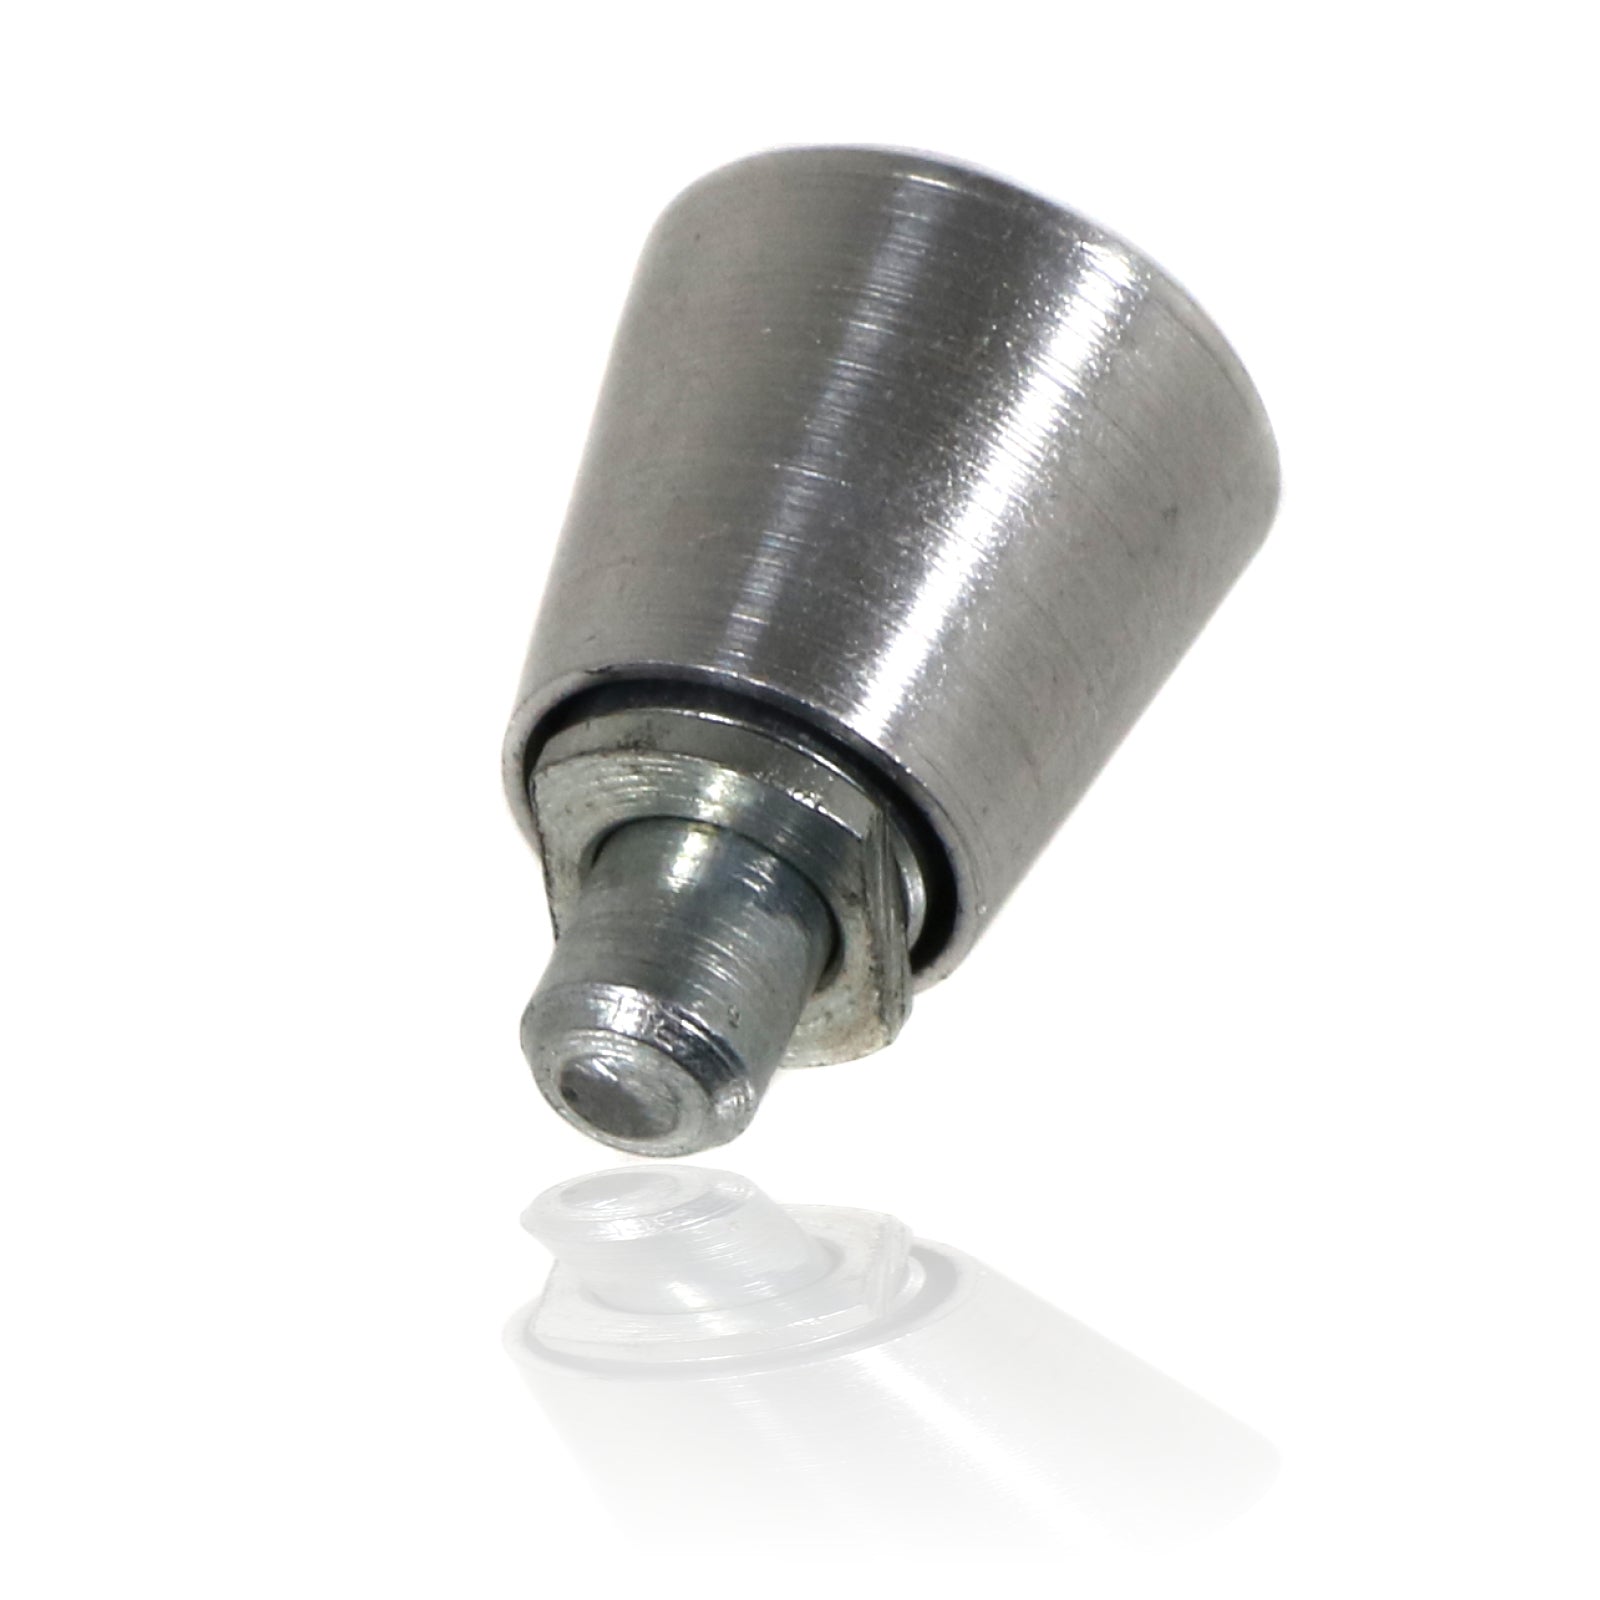 M7 Mini Index Plunger for Thin-Walled Material stainless steel